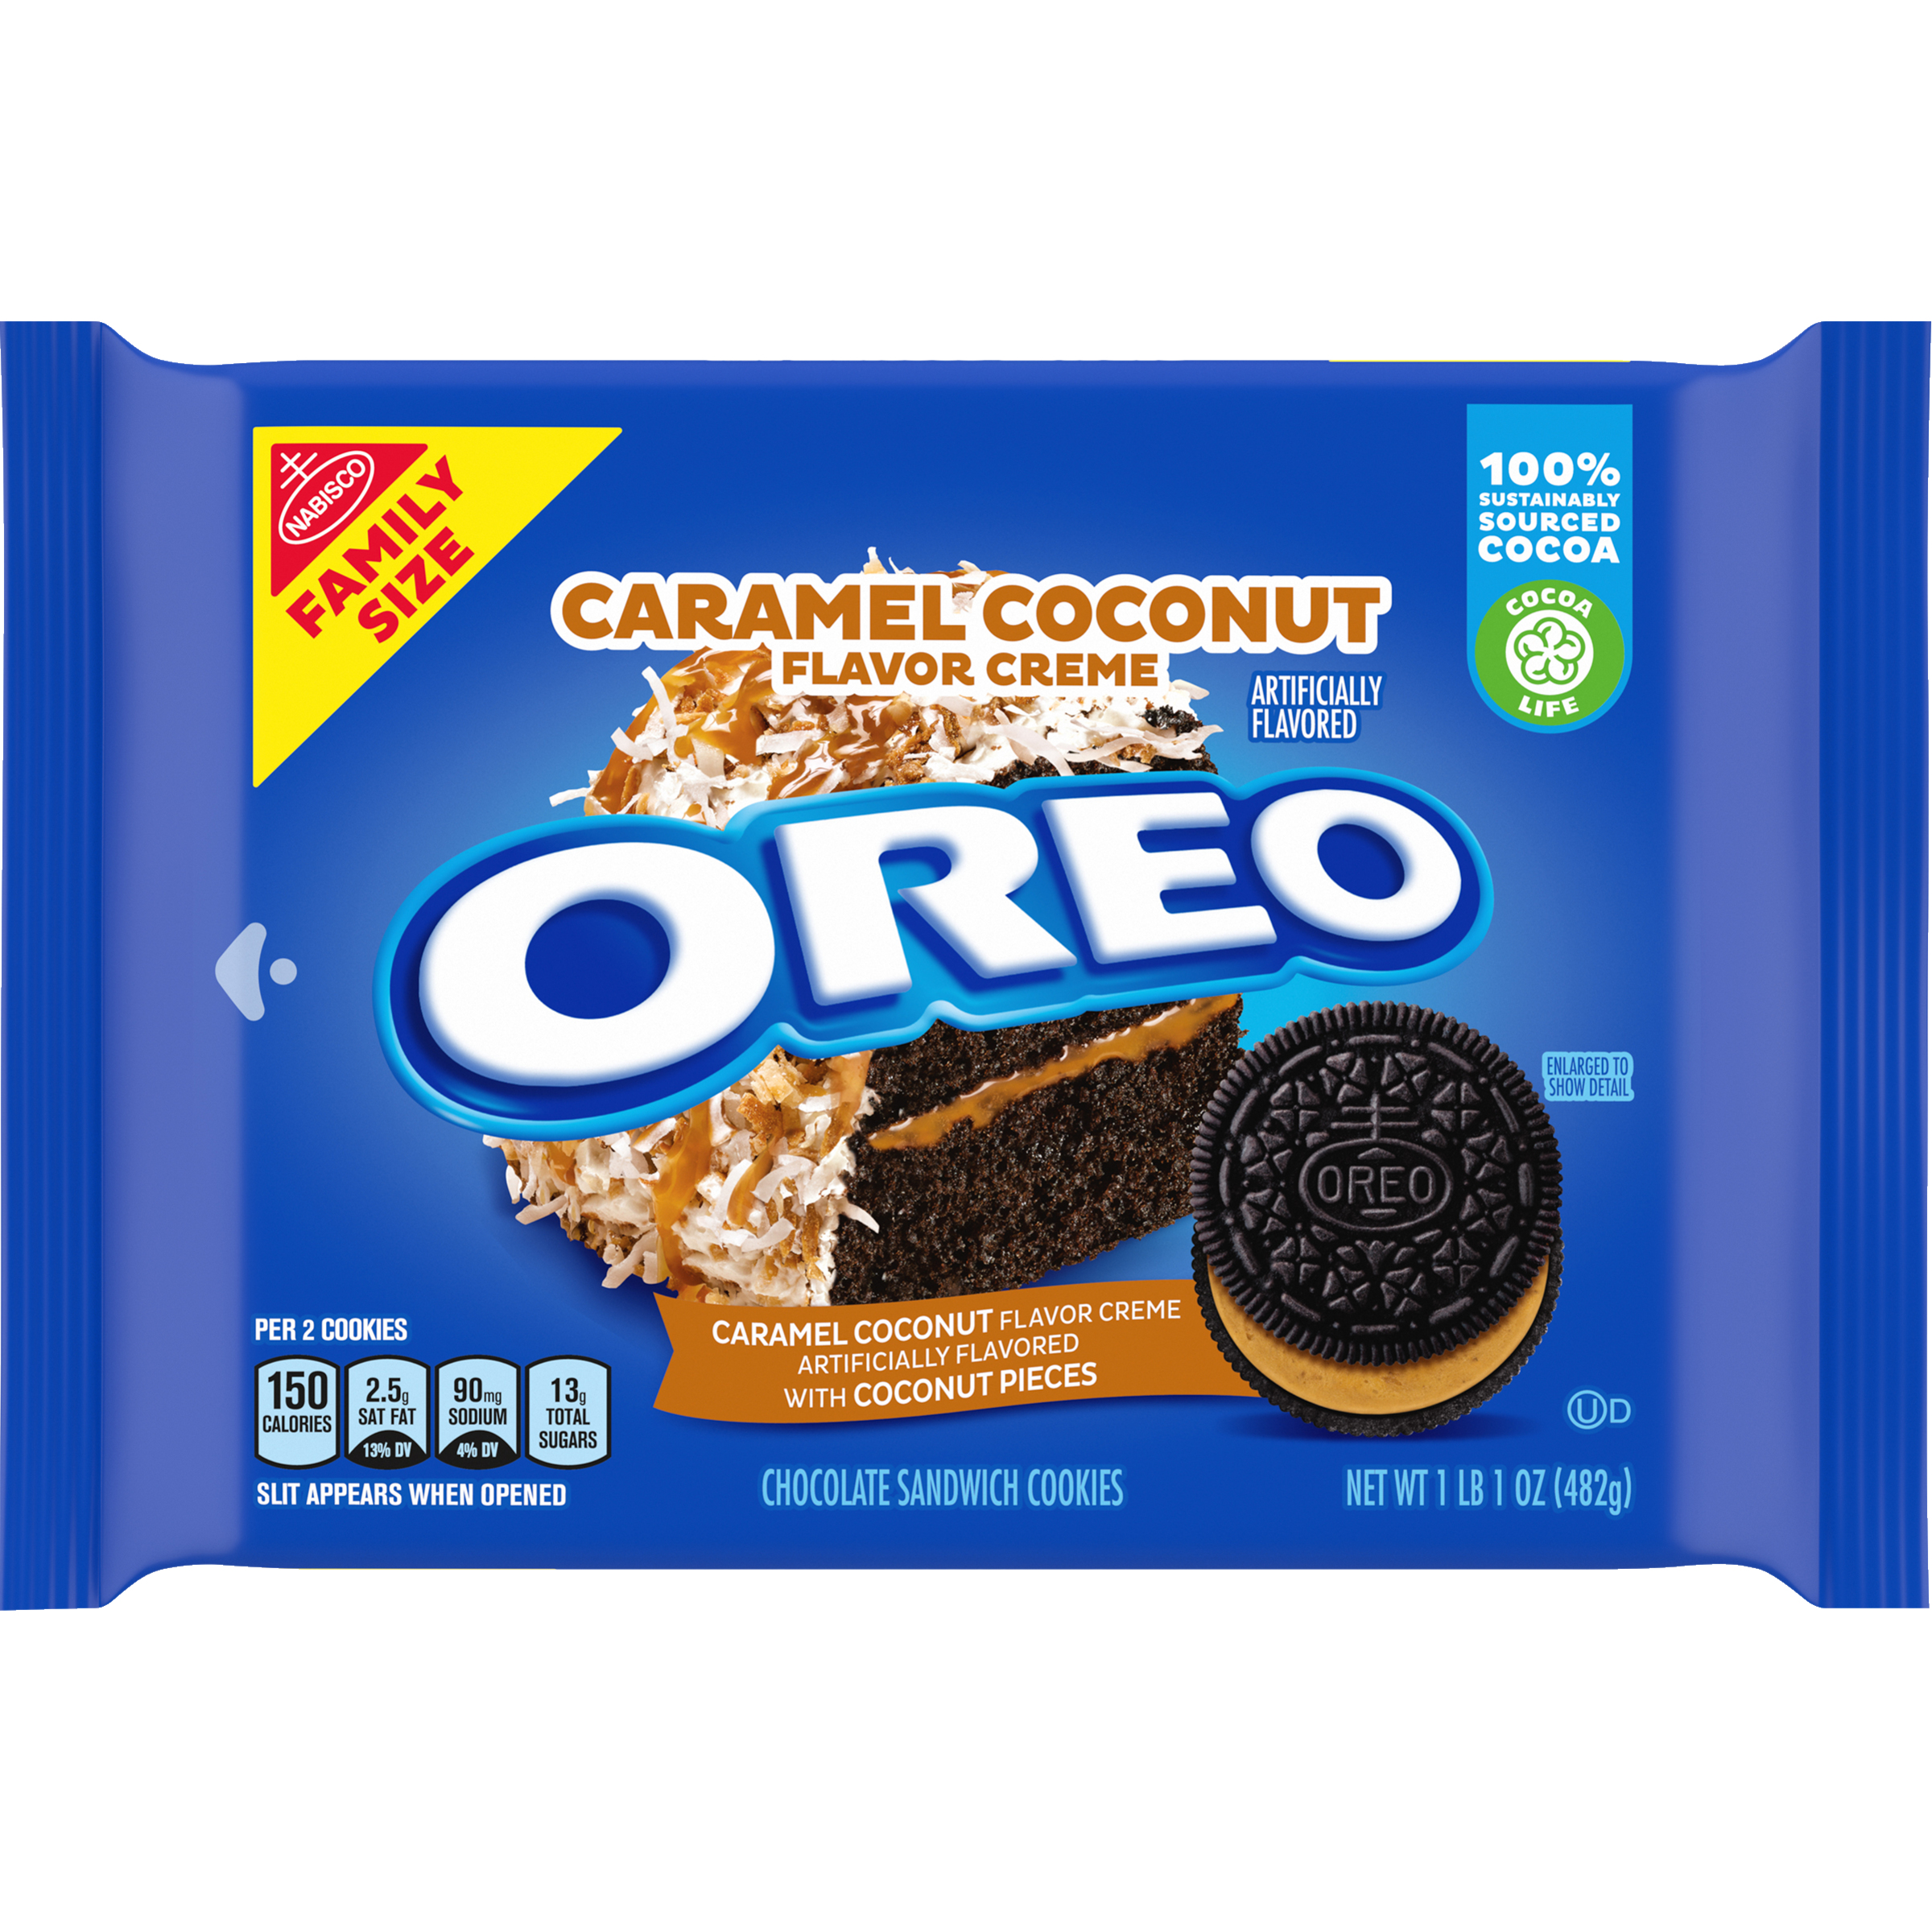 OREO Caramel Coconut Flavored Creme Chocolate Sandwich Cookies, Family Size, 17 oz-1